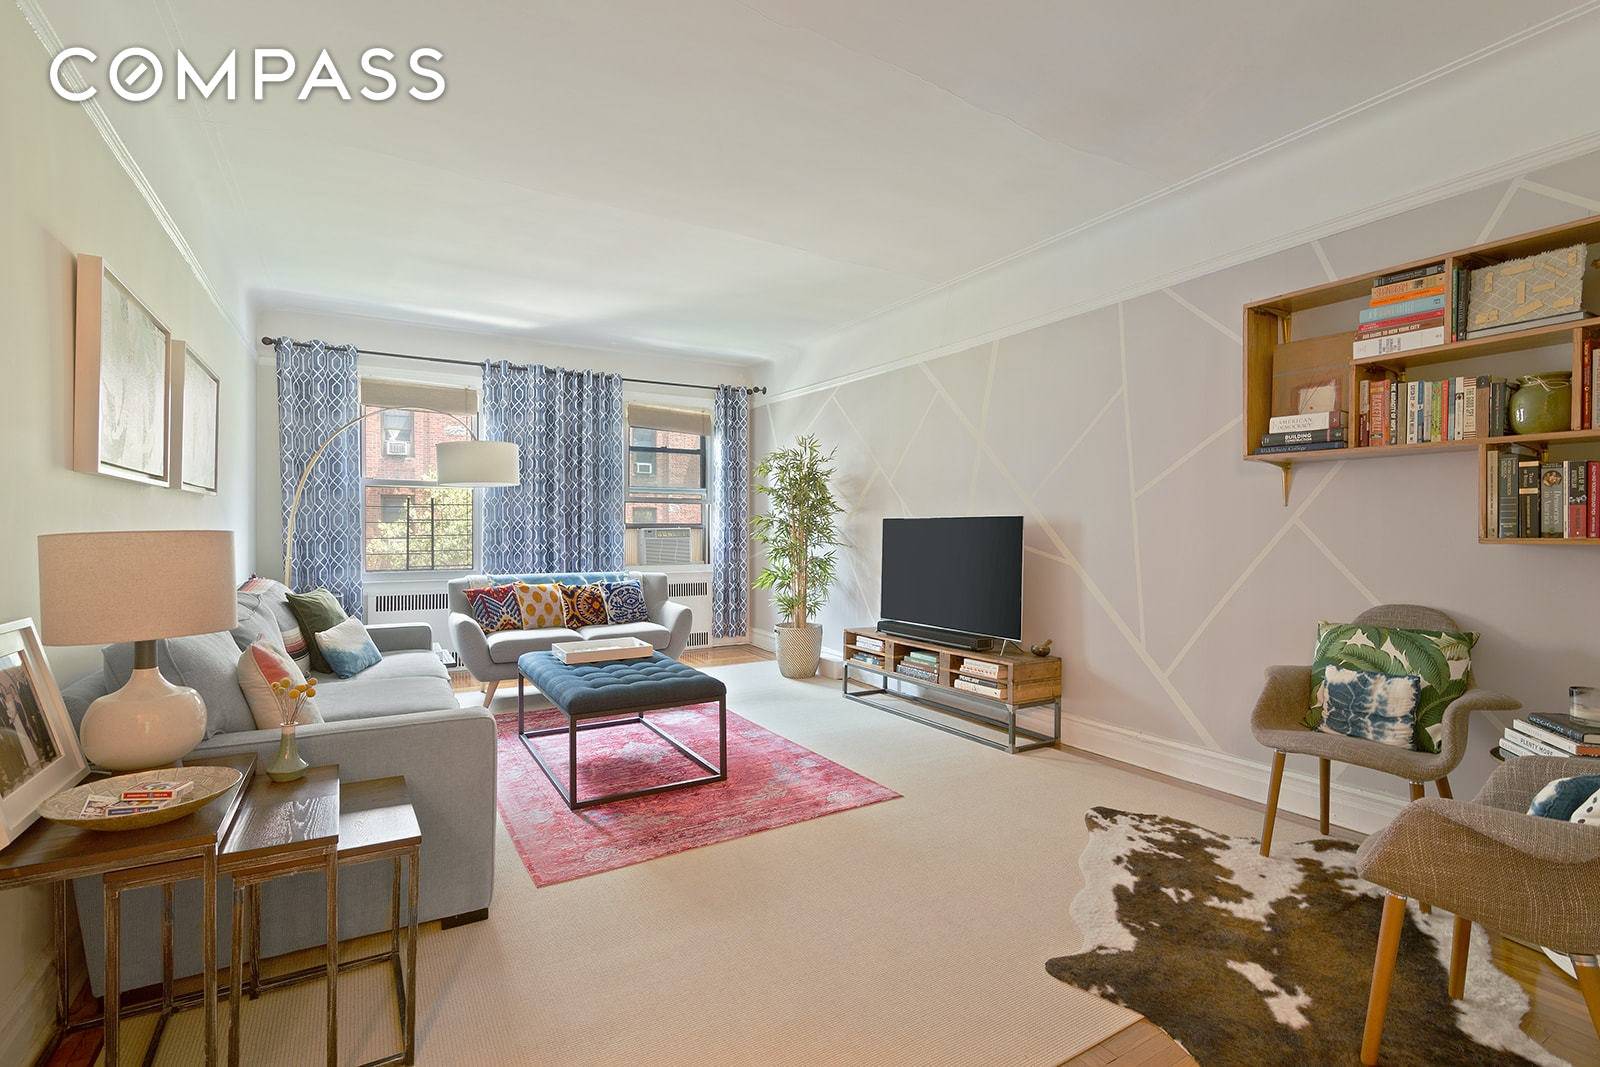 Spacious, light filled two bedroom two bathroom home in Stephen Hall, a pre war cooperative in the heart of Jackson Height's historic district, minutes from the 7 train as well ...